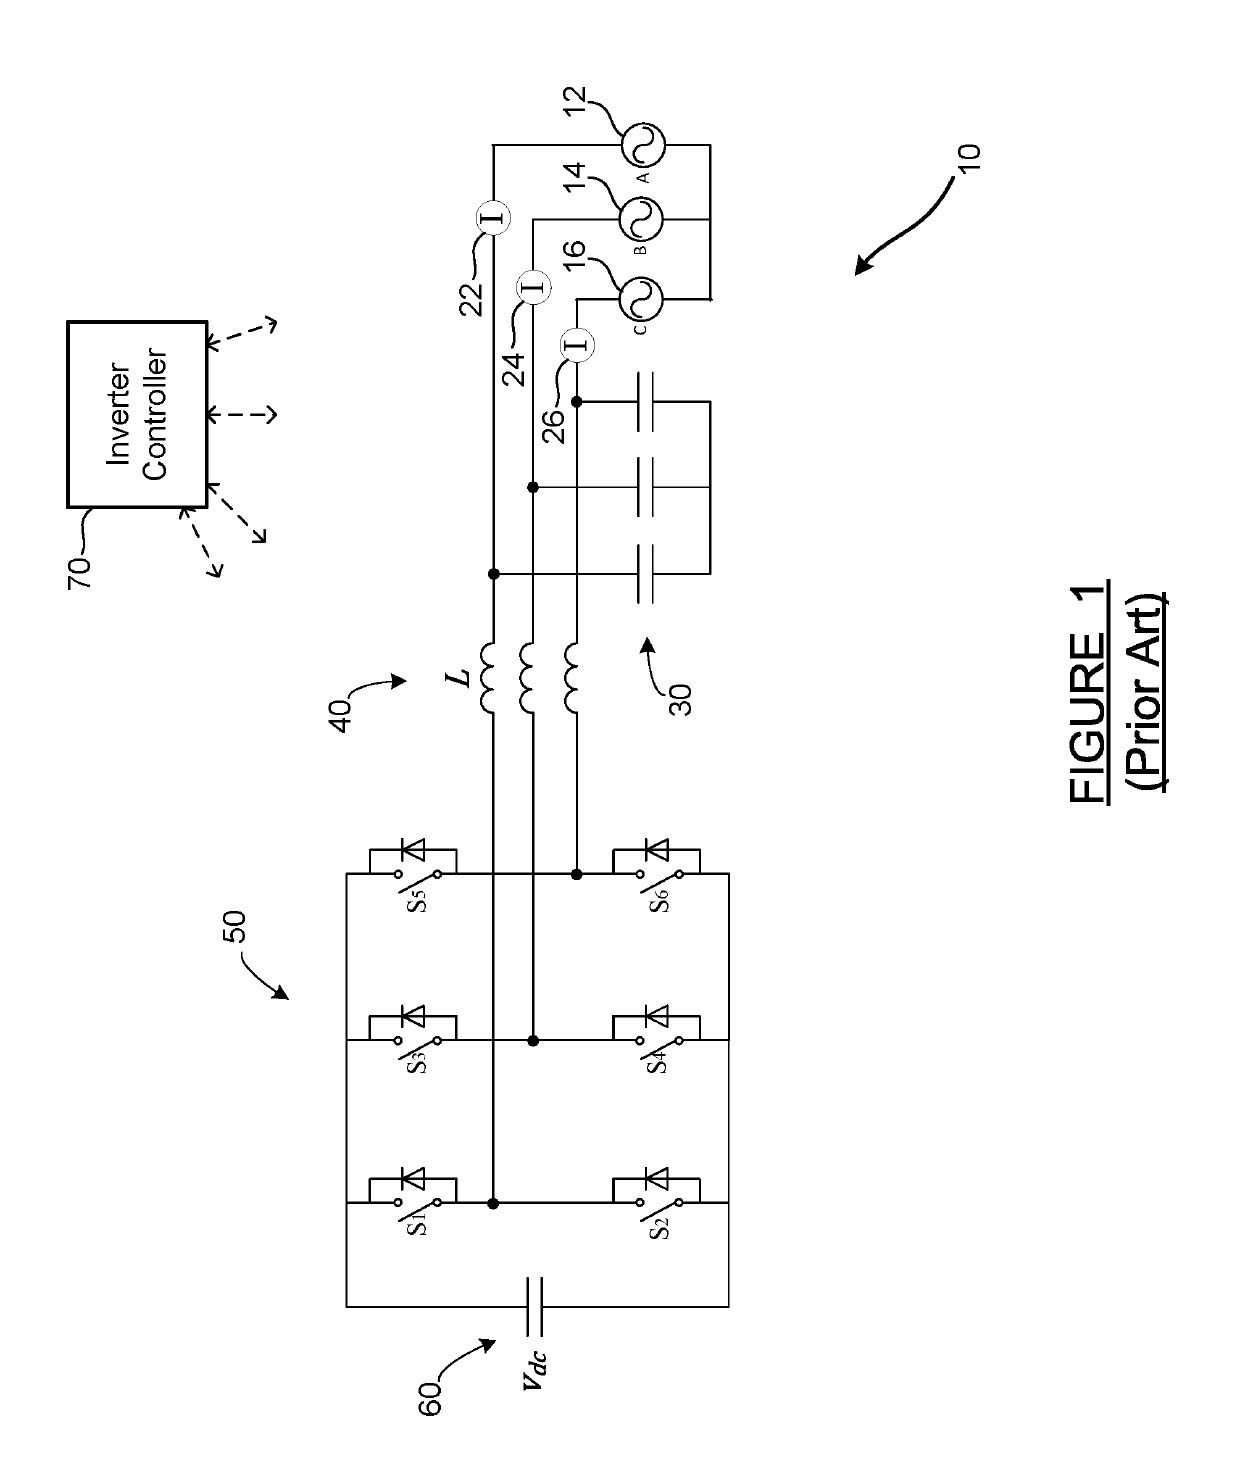 Three phase inverter DC-link voltage control method for reactive power overload transient process